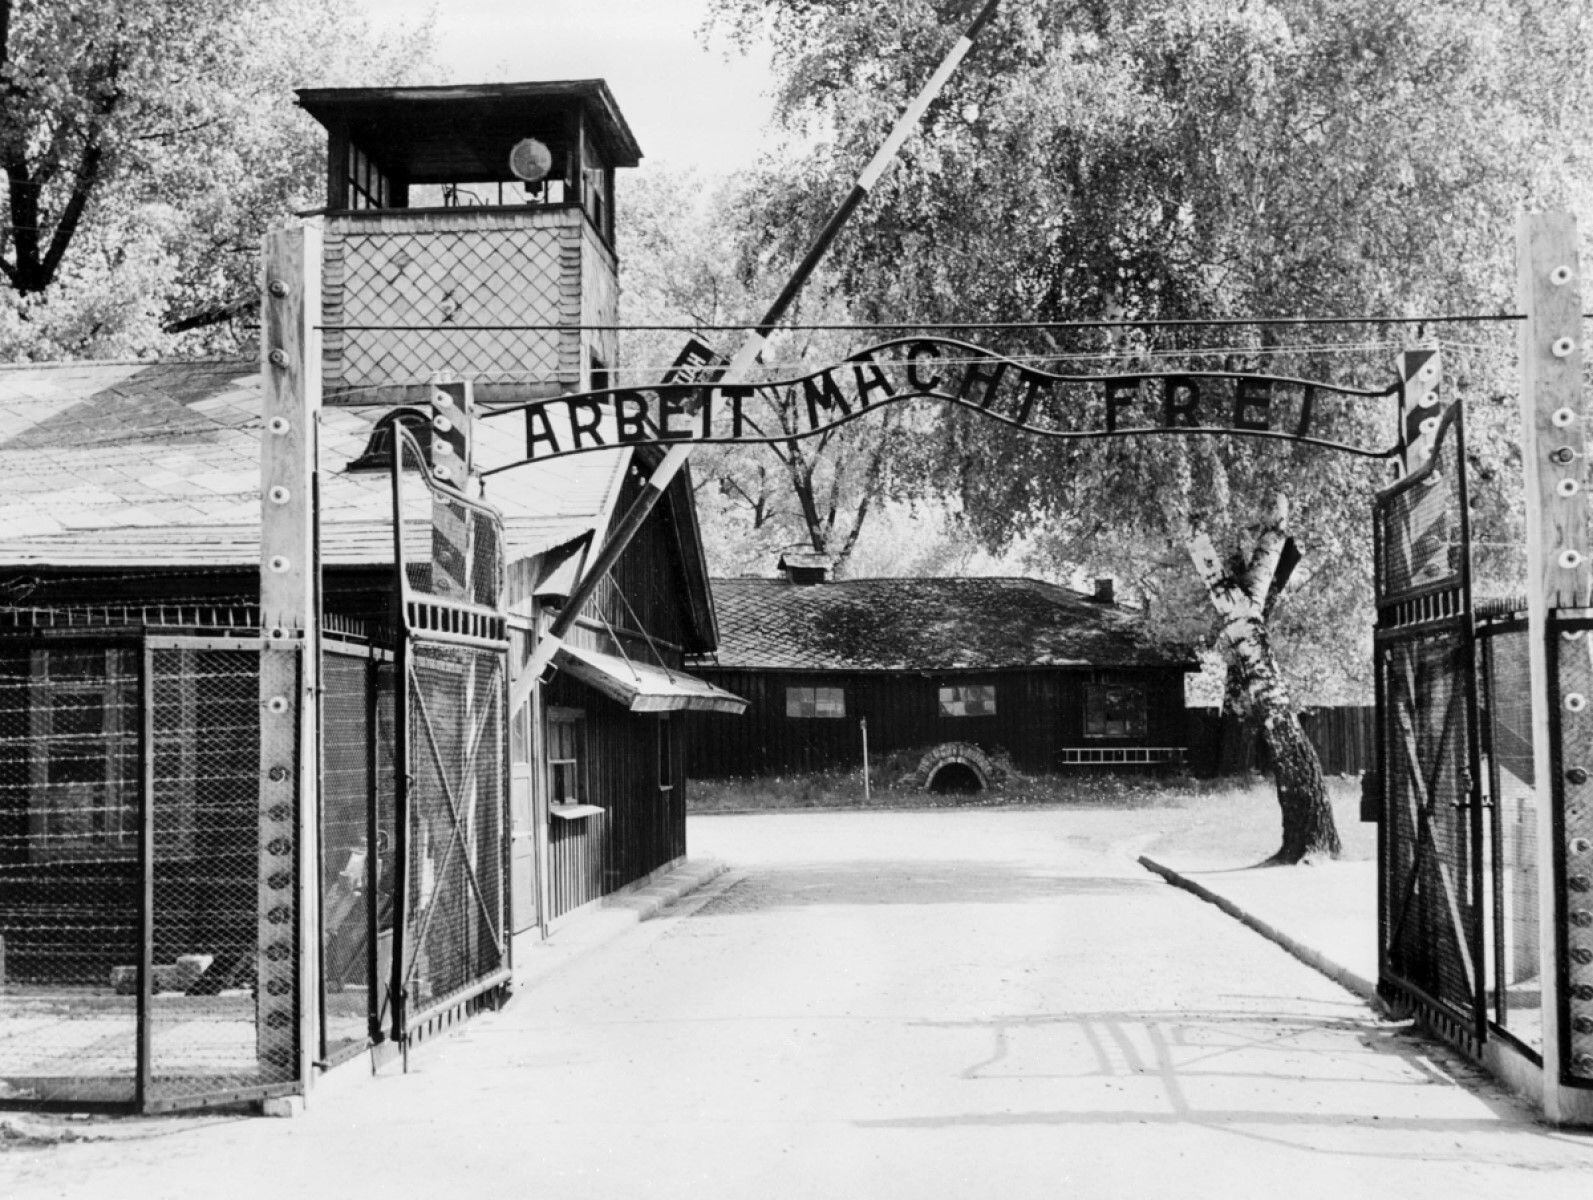 Gateway to the Auschwitz concentration and extermination camp, where more than a million people were killed.  (Photo: AFP Agency)